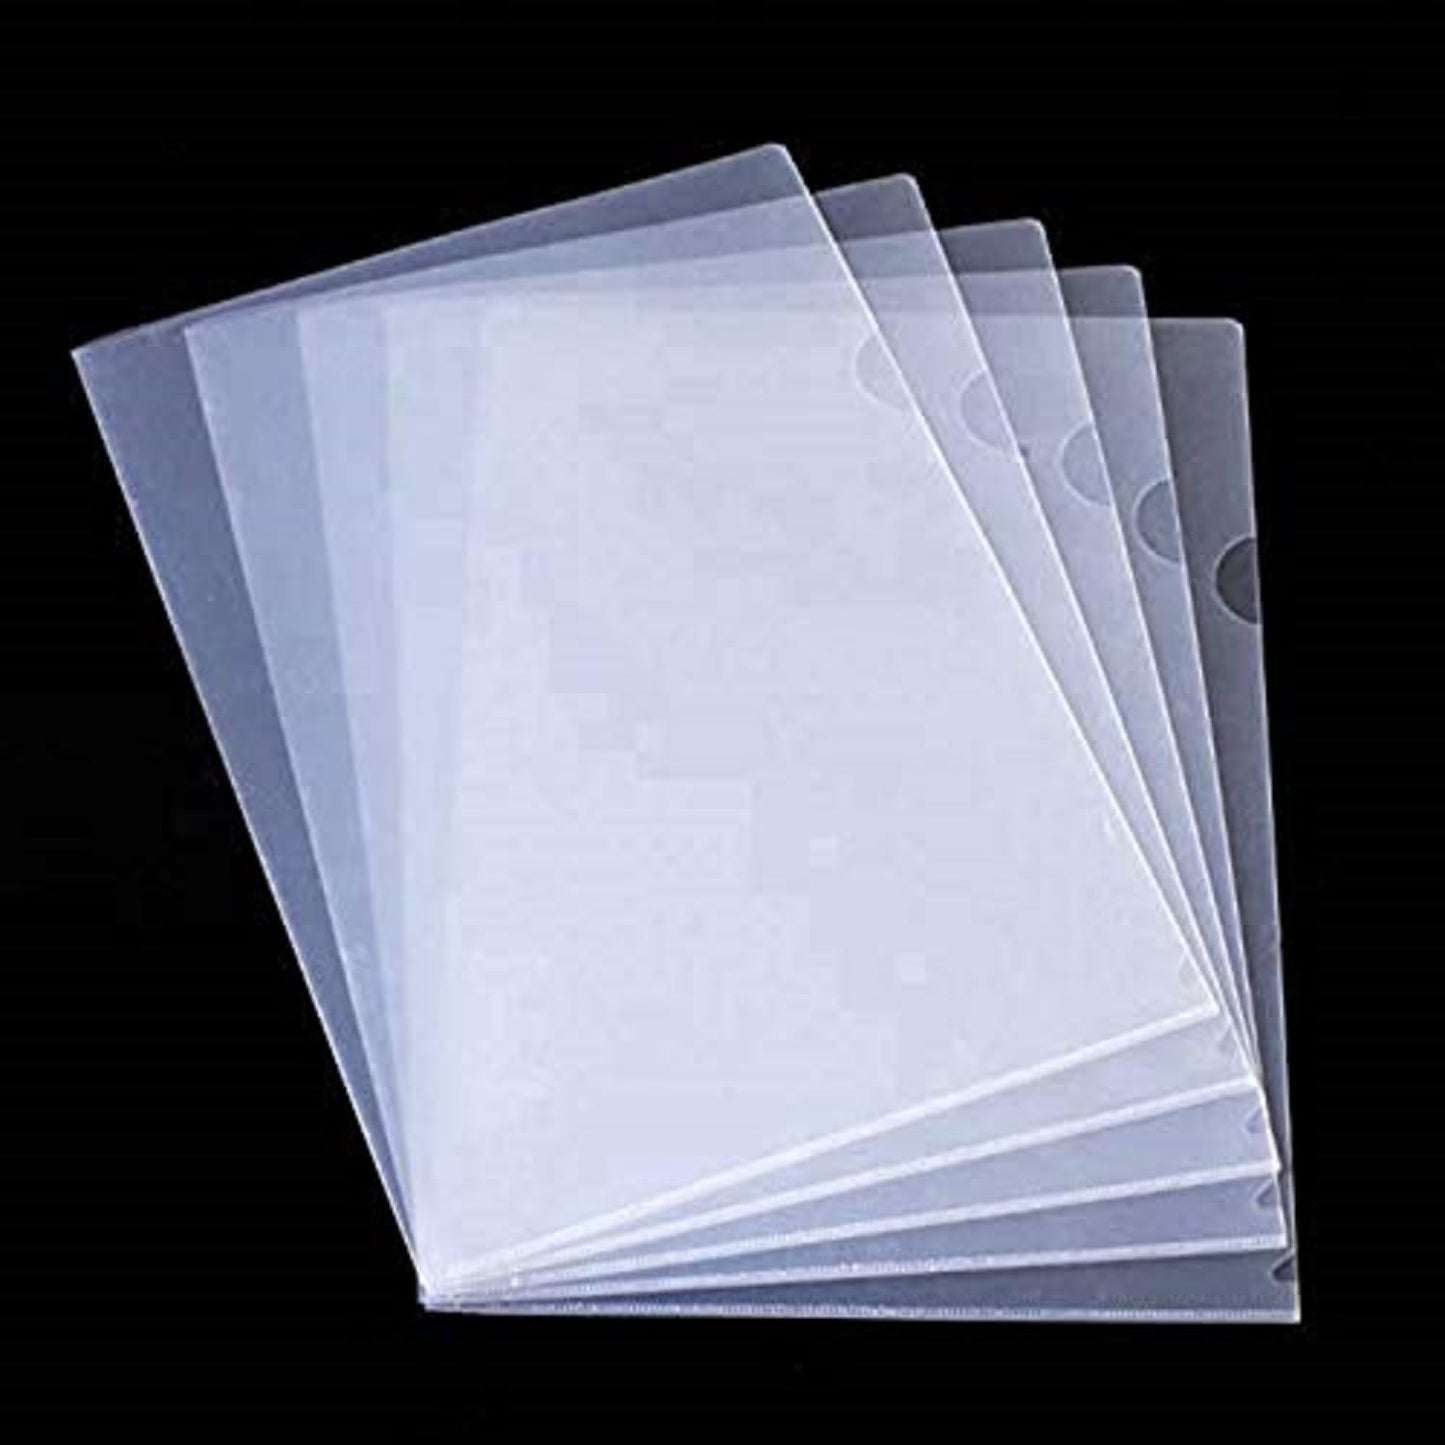 DIGISMART L Type Folder for A4 Size Documents Clear Transparent Sleeves for Document Protection Paper Holders Organizer